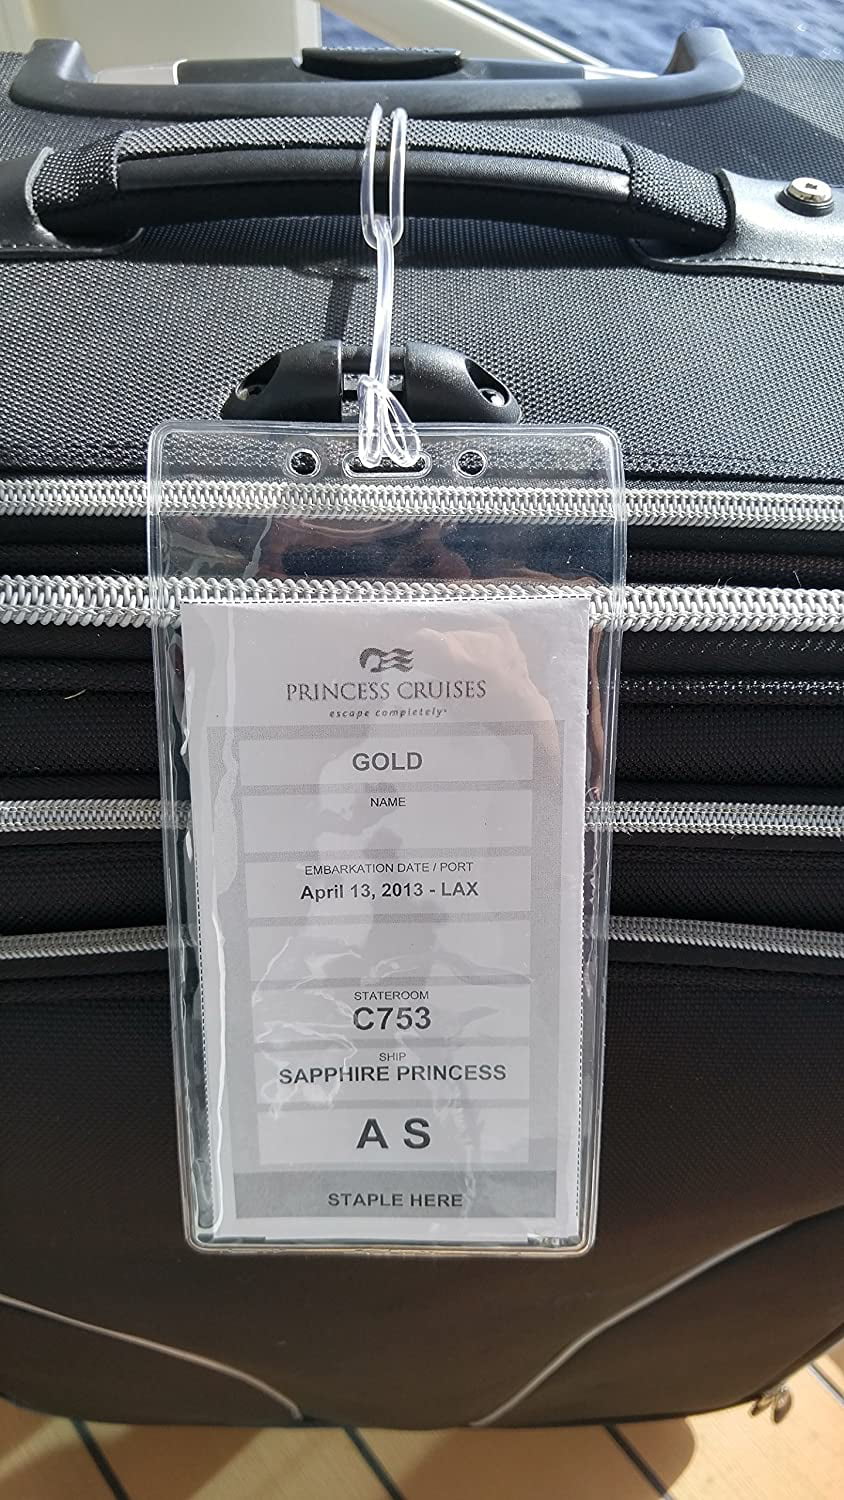 Away on X: Want to include a little something extra?✨Elevate your suitcase  with a foil monogrammed luggage tag. Order by 12/16 for guaranteed delivery  by 12/24. 📷 imzackery   / X